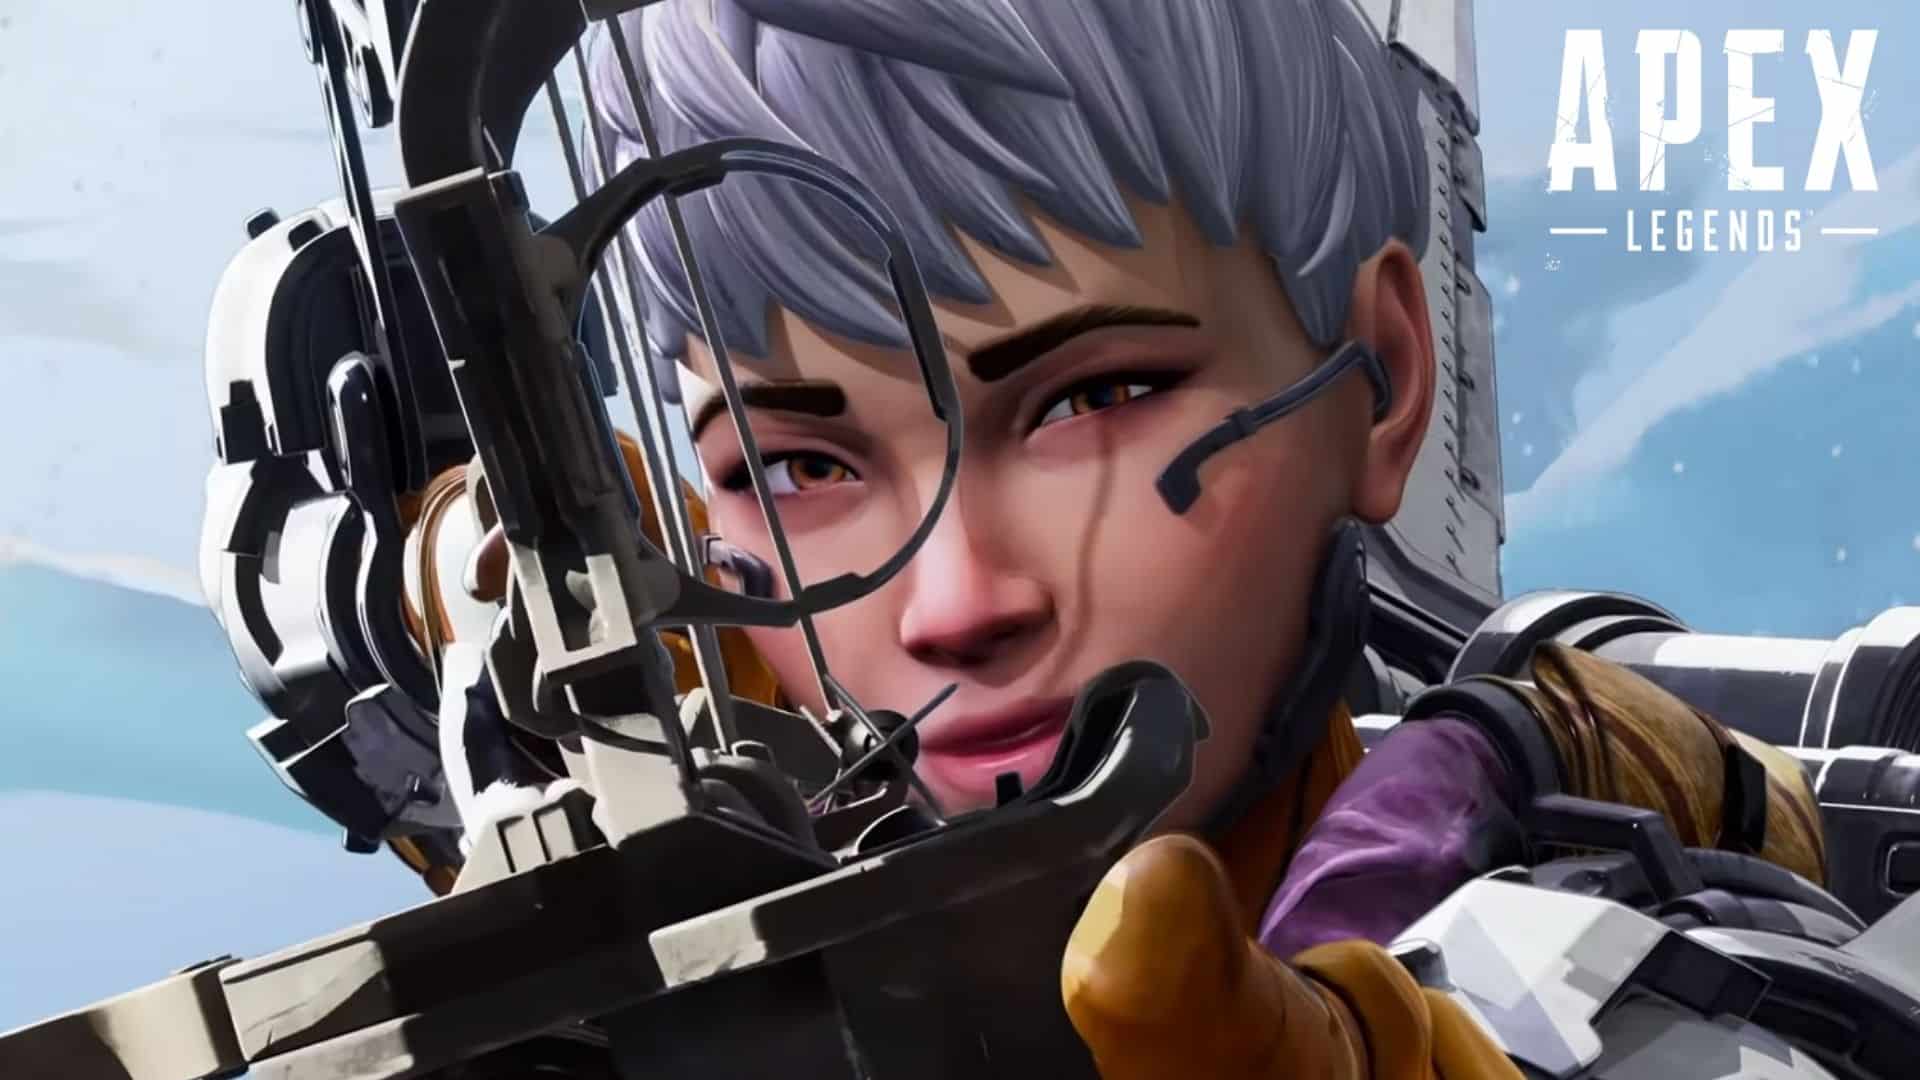 Valkyrie holding a bocek bow in apex legends